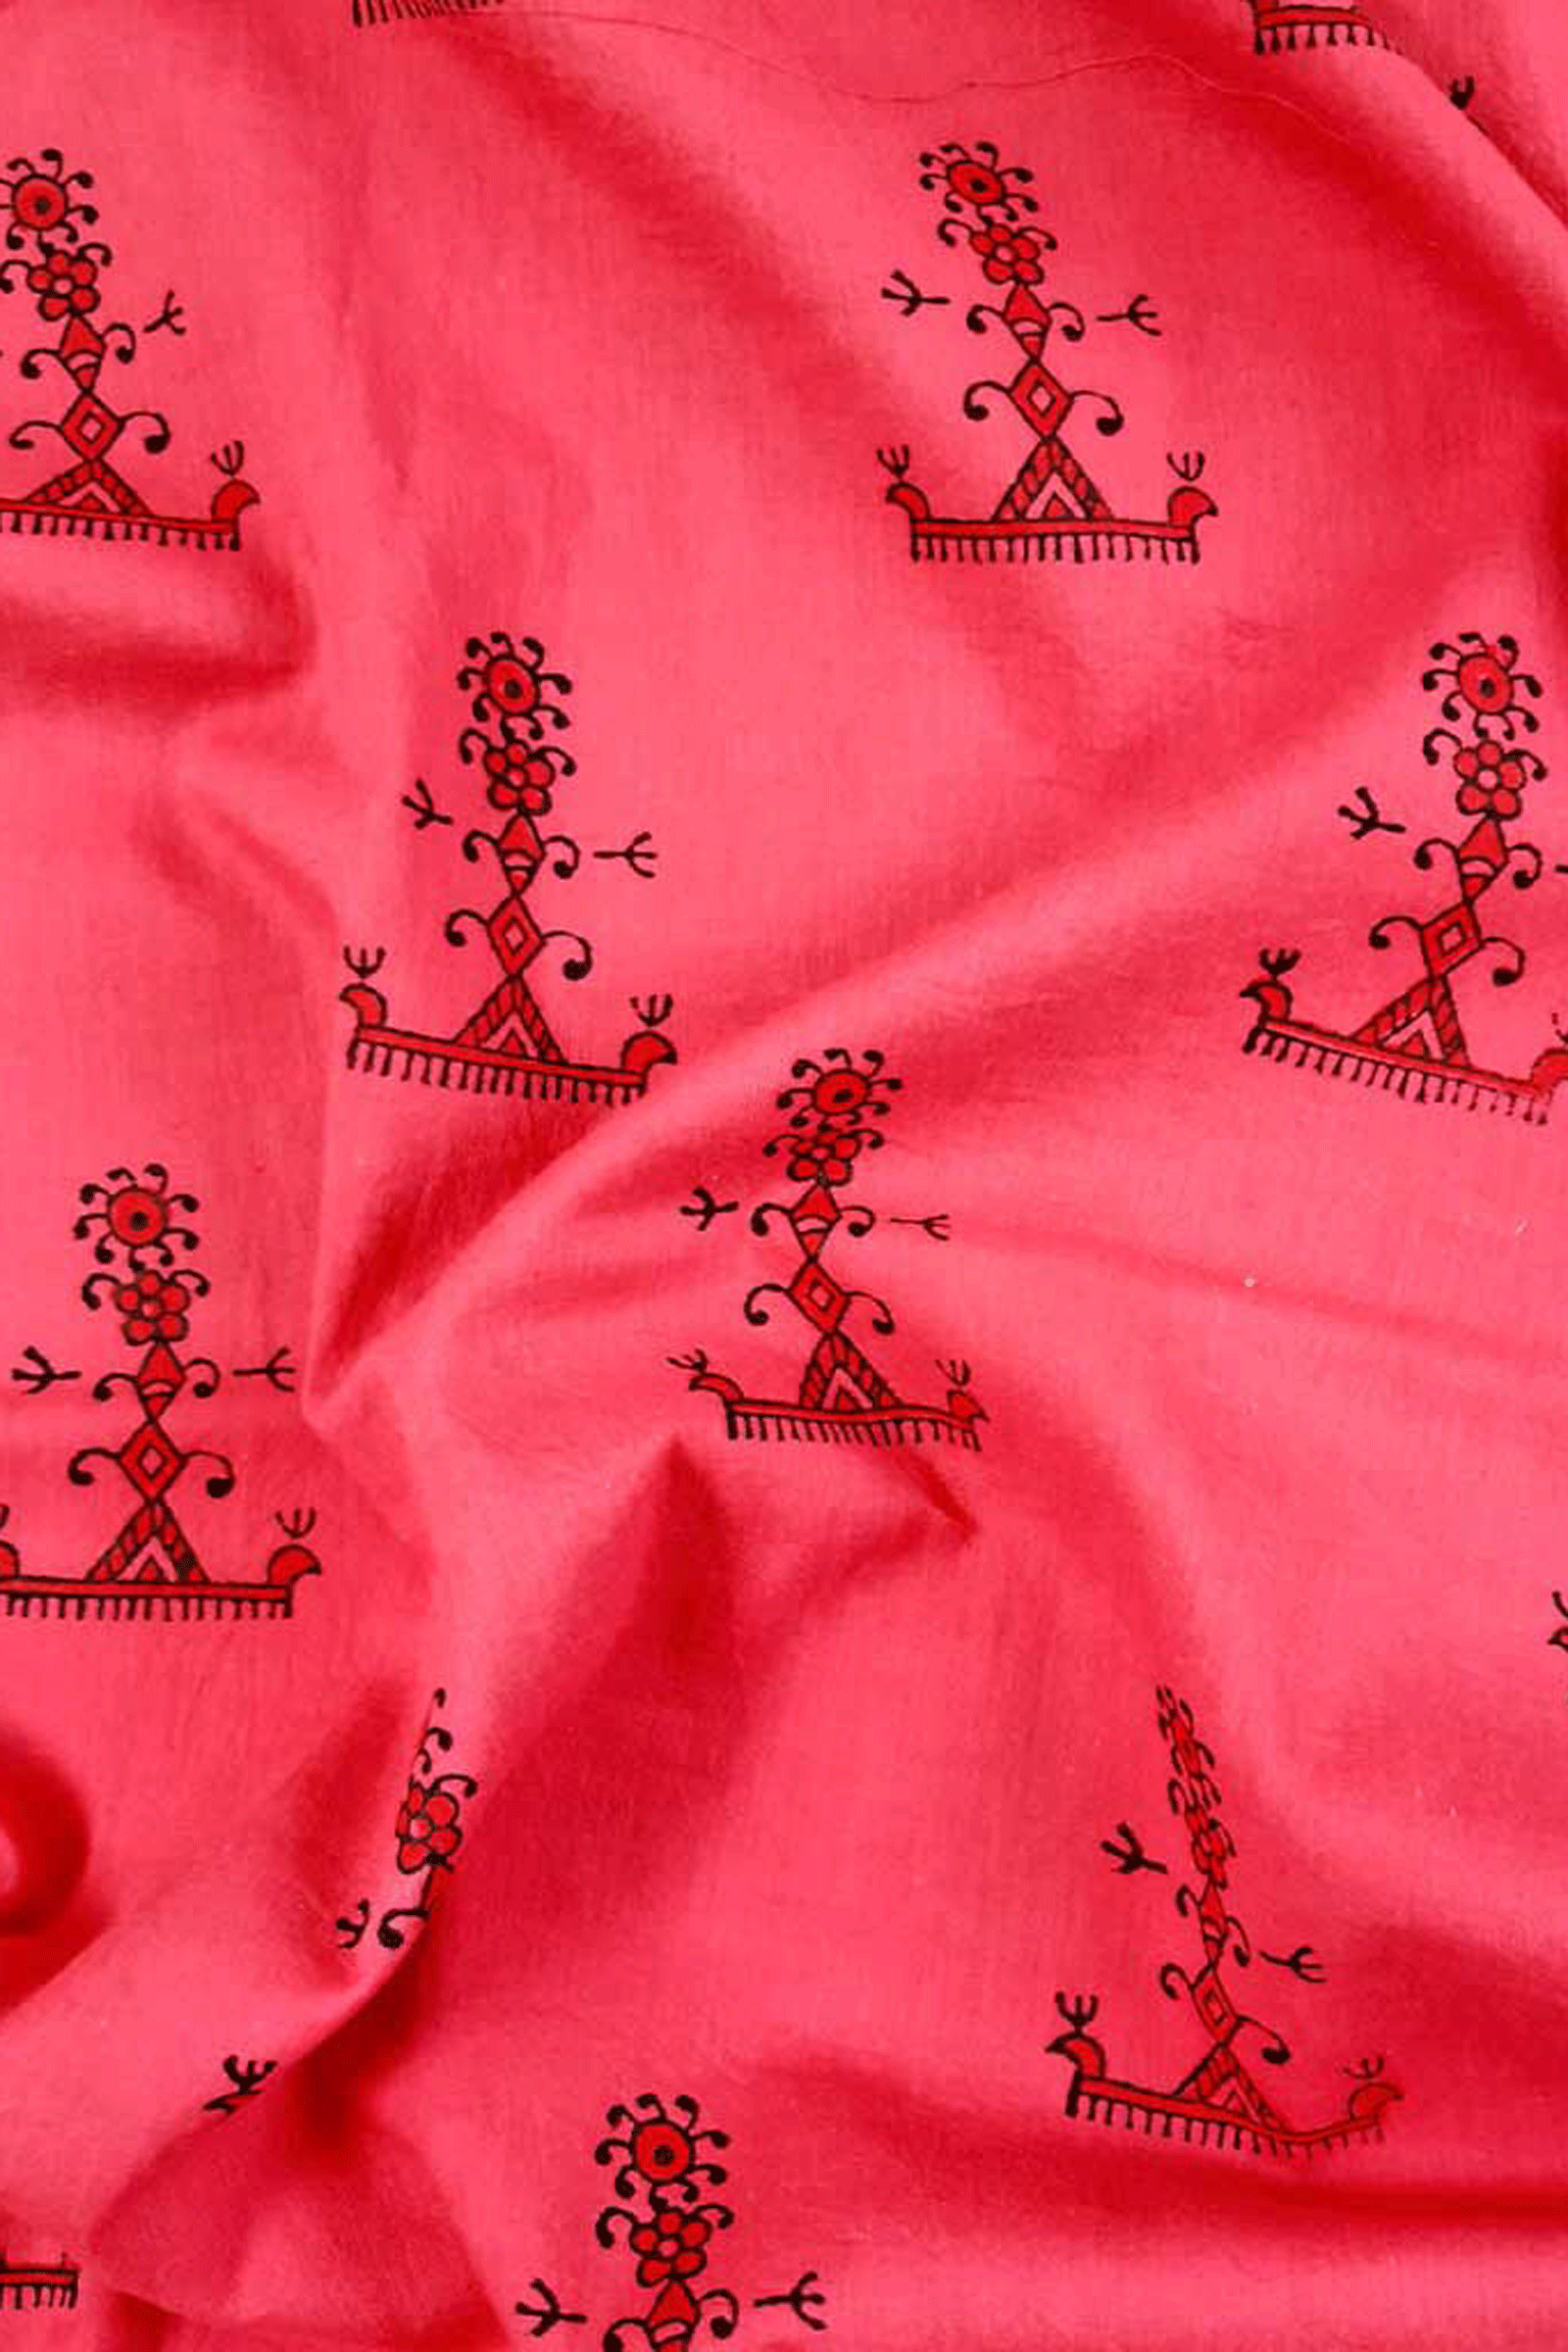 Chippa Hand Block Printed Red Color Cotton Fabric With Black and Marron Tribal Motif  SKU- BS60009 - Bhartiya Shilp